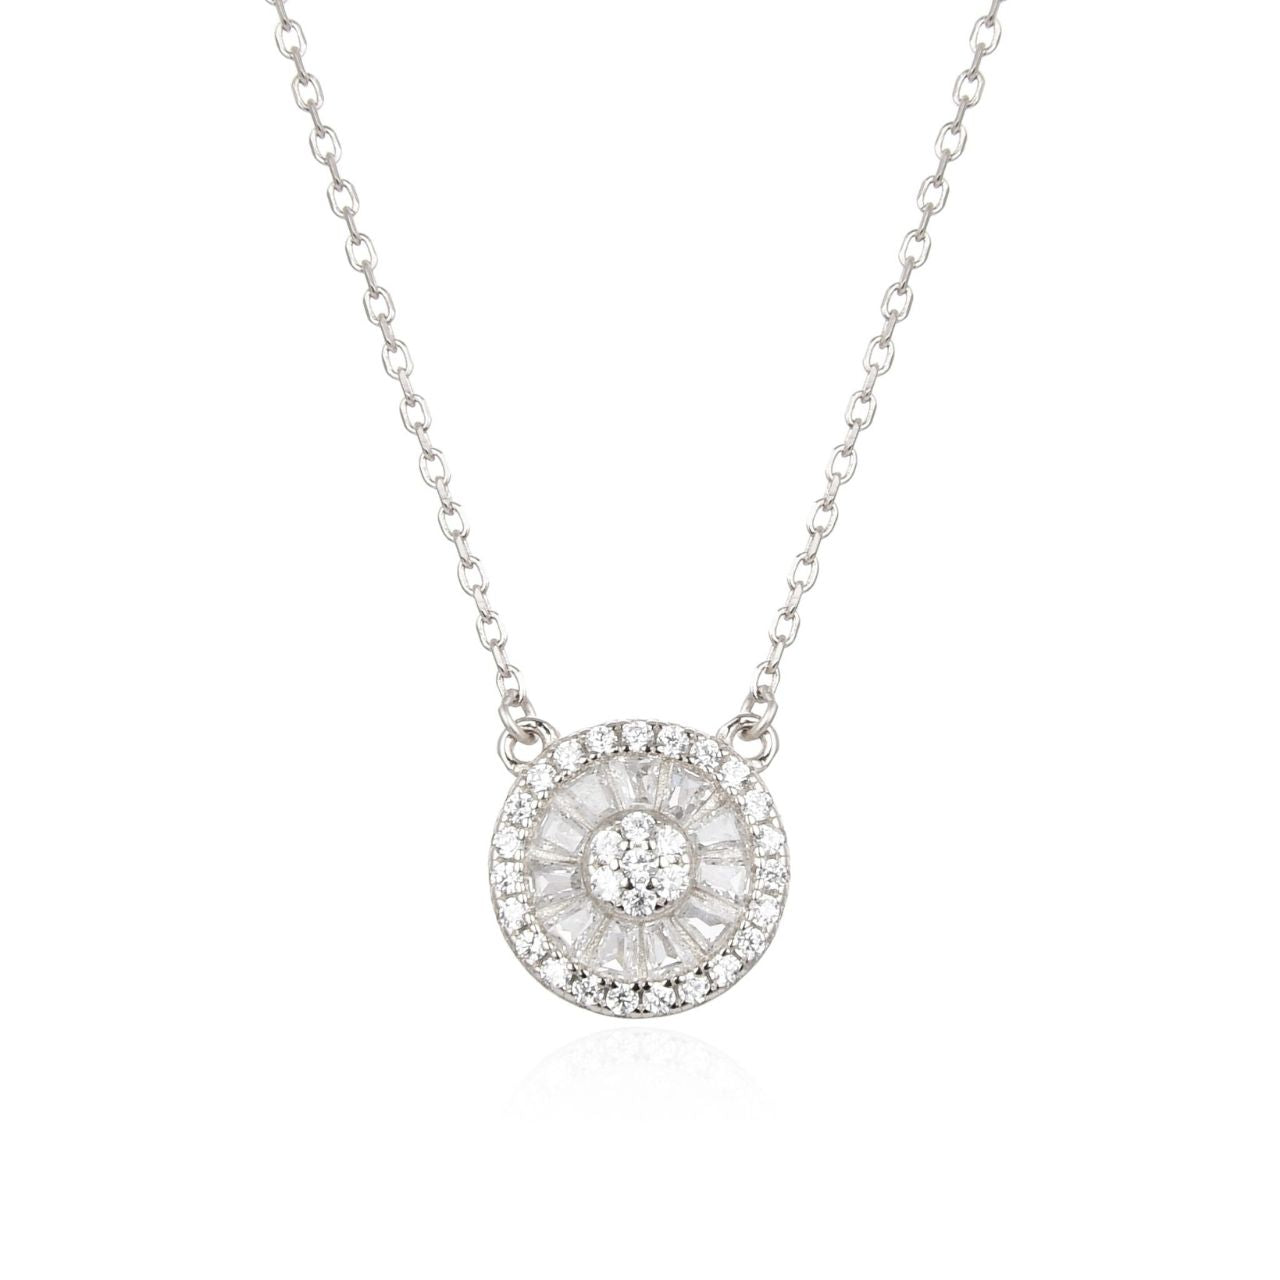 Silver Diamante Rosette Necklace by Kilkenny Silver  Sterling silver rosette necklace with cubic zirconia stones. The perfect piece to elevate any style.